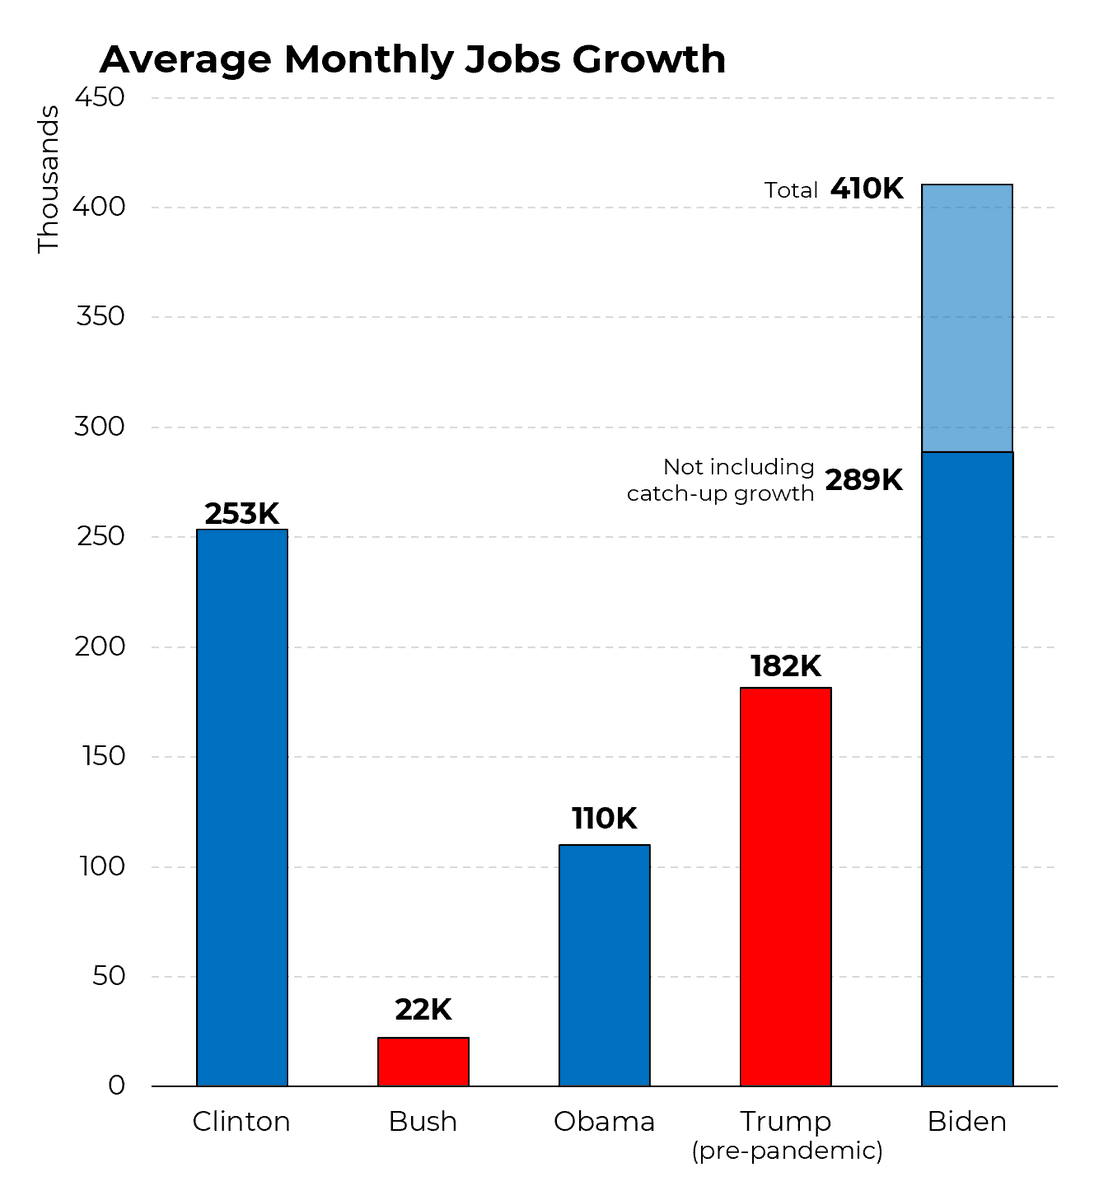 Even excluding post-2020 catch-up growth, the US has added more jobs per month under Biden than any other president. @Morning_Joe